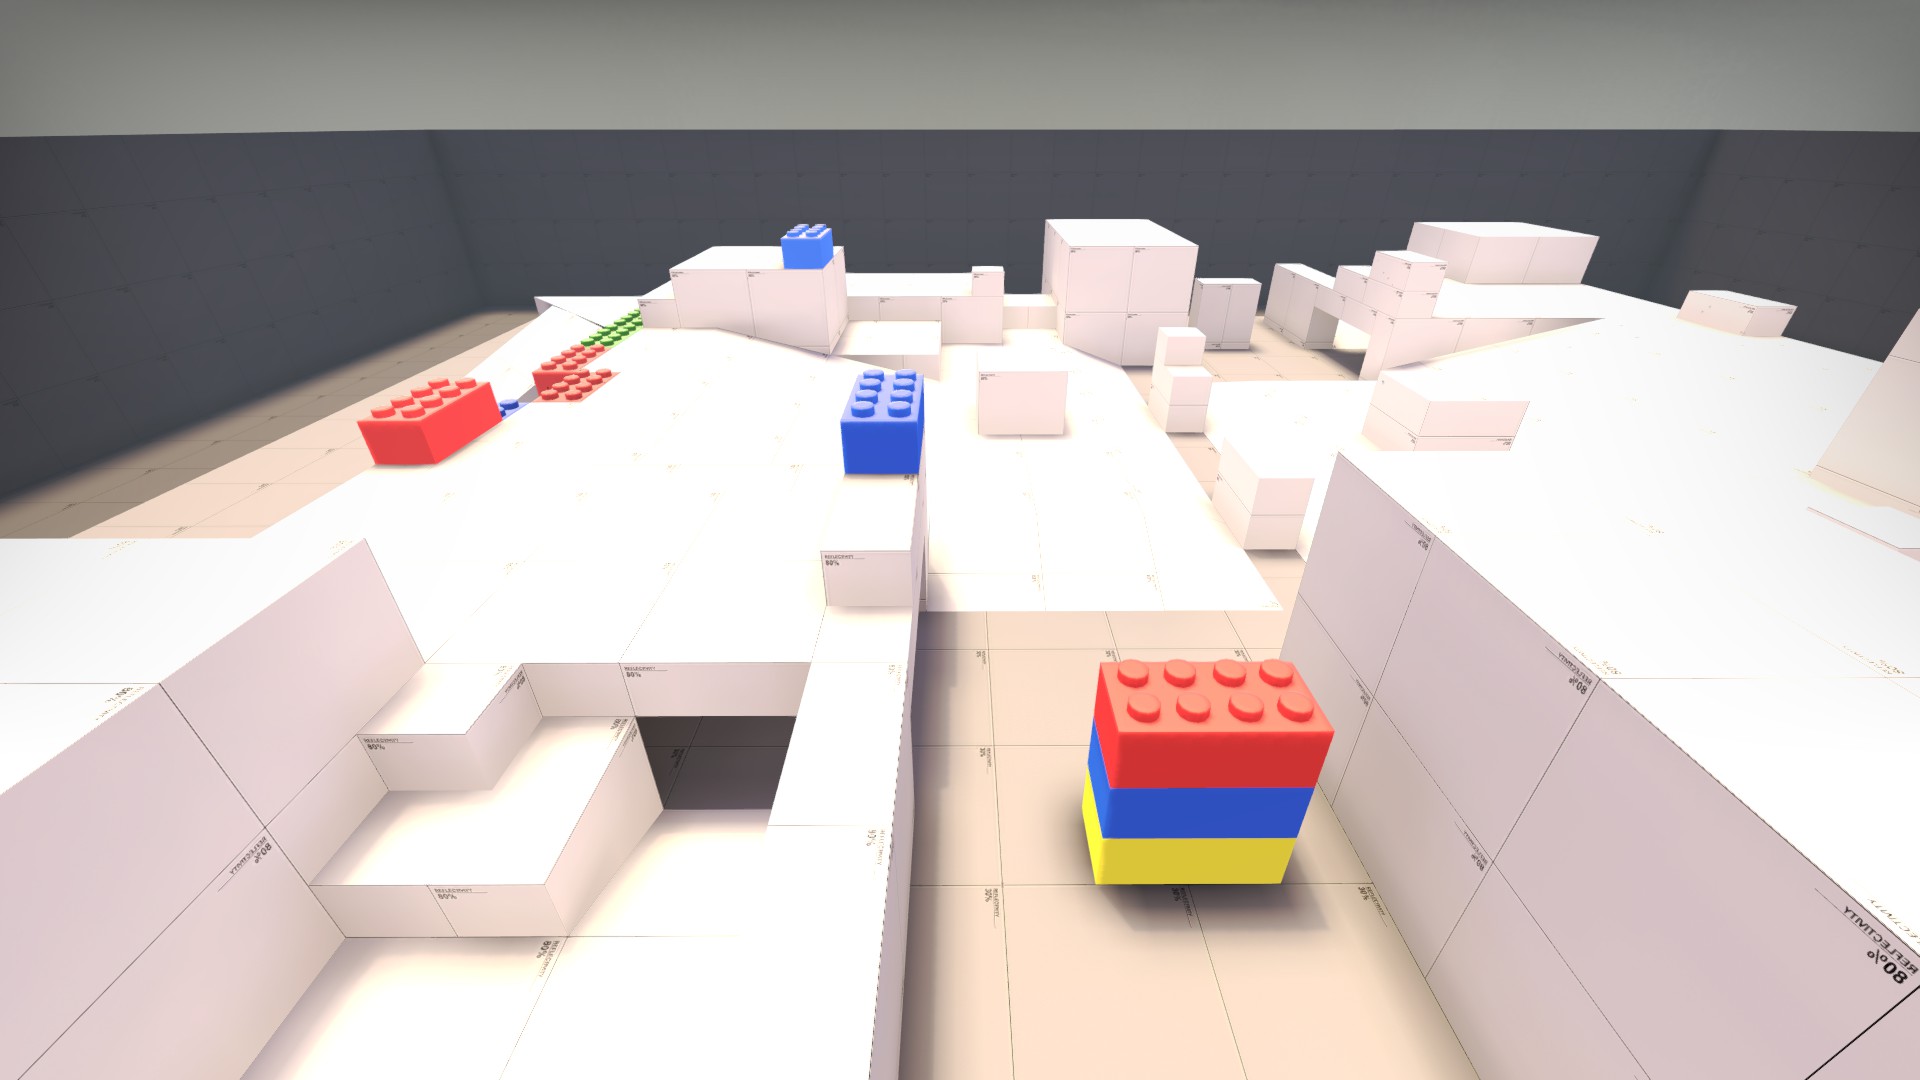 Counter-Strike Could Really Use More Legos